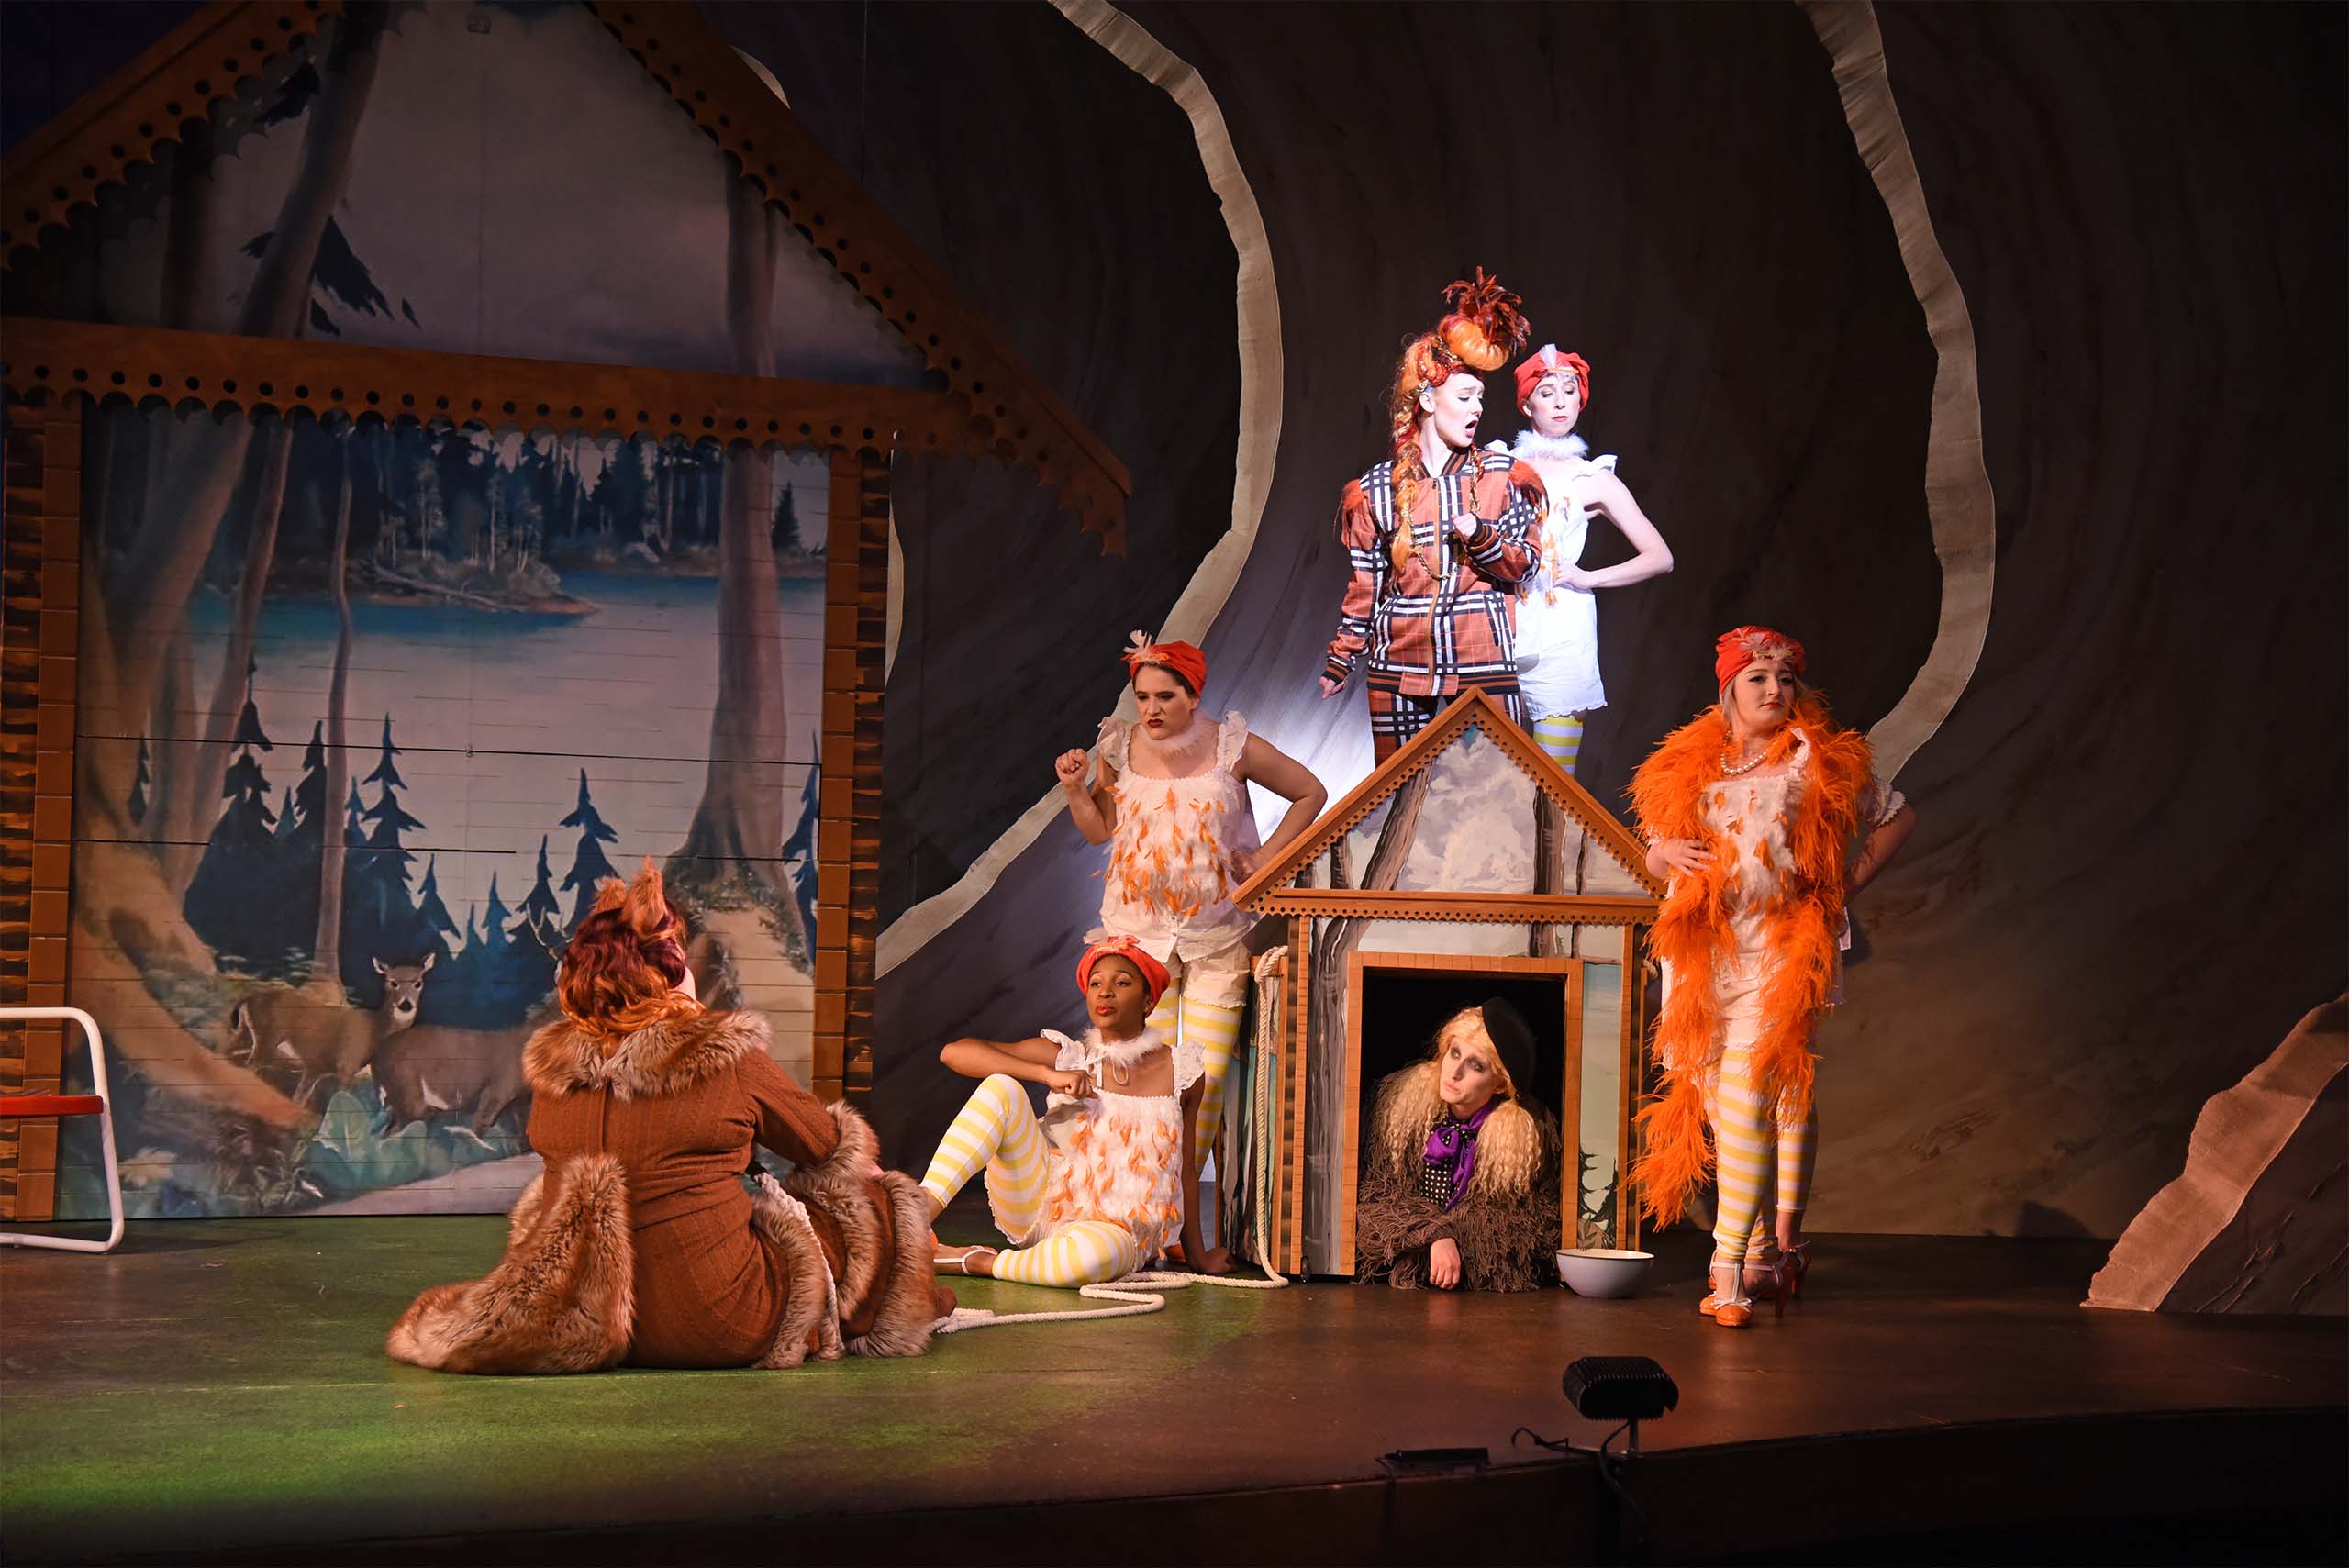 Opera performers on stage costumed as a fox and barnyard animals